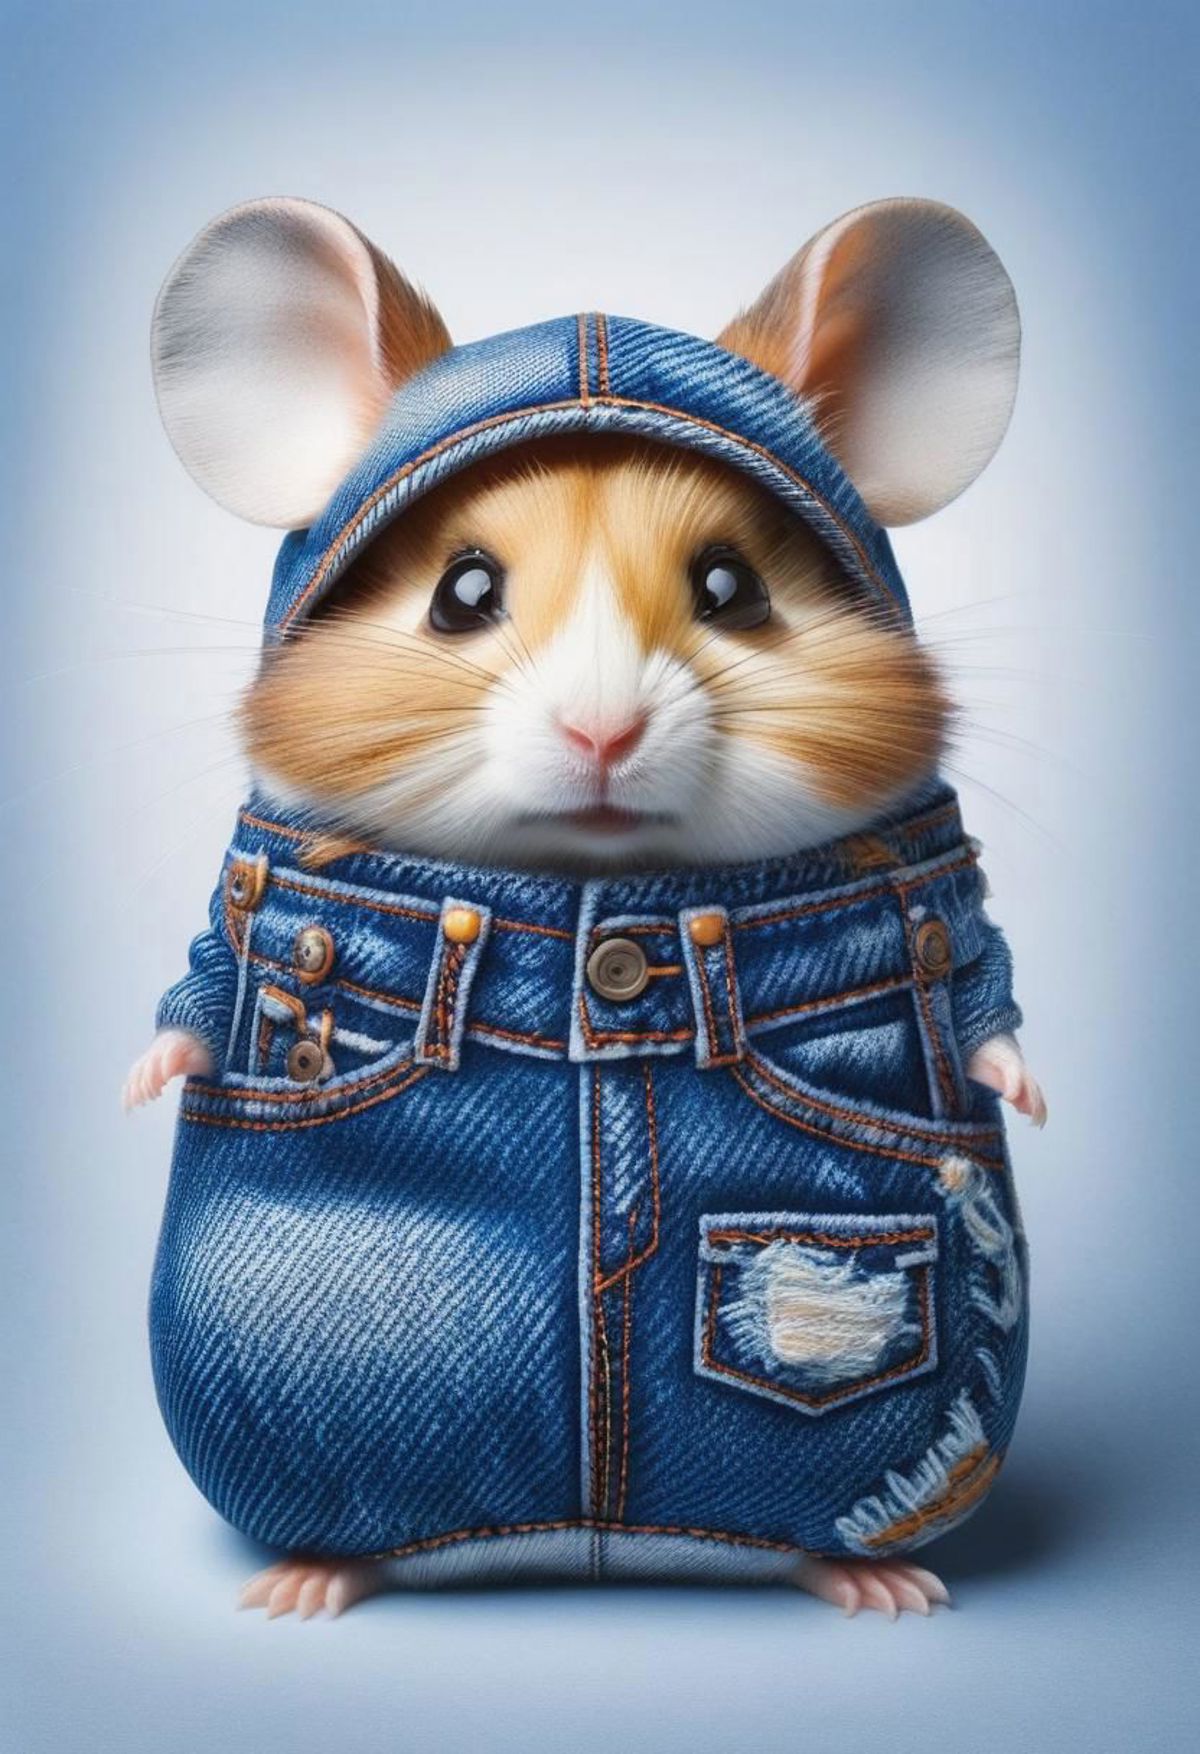 A small hamster wearing blue jeans.